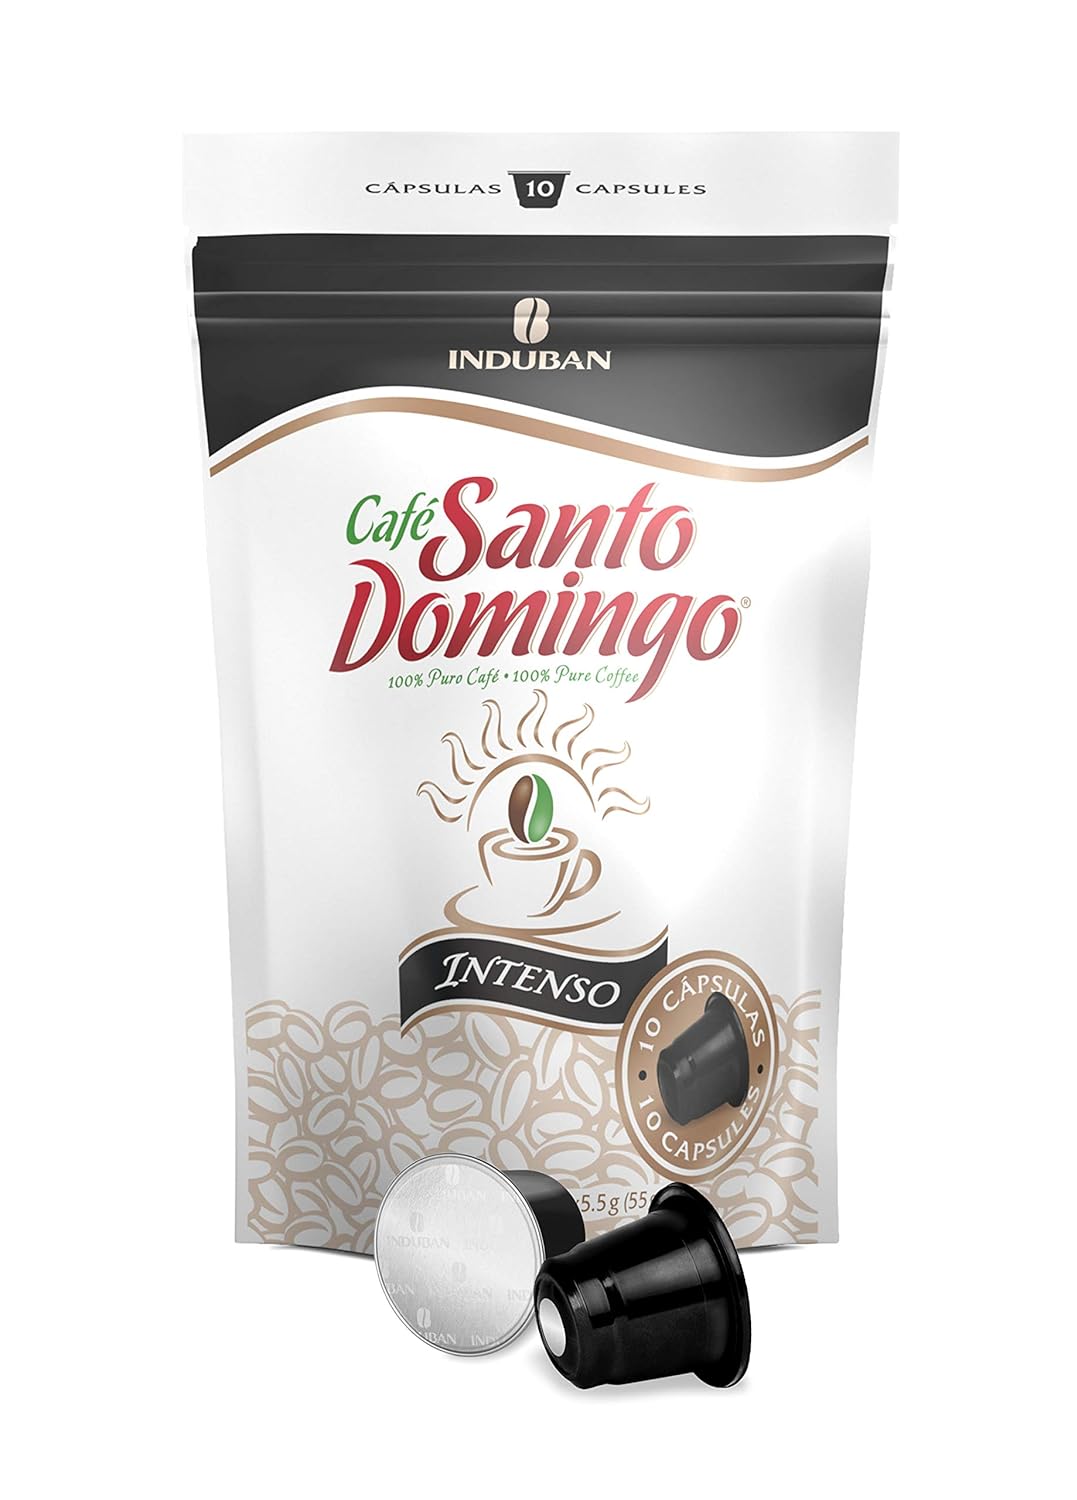 Santo Domingo Coffee Intenso Capsules - Compatible with Nespresso Original Brewers - Product from the Dominican Republic (10 Count)